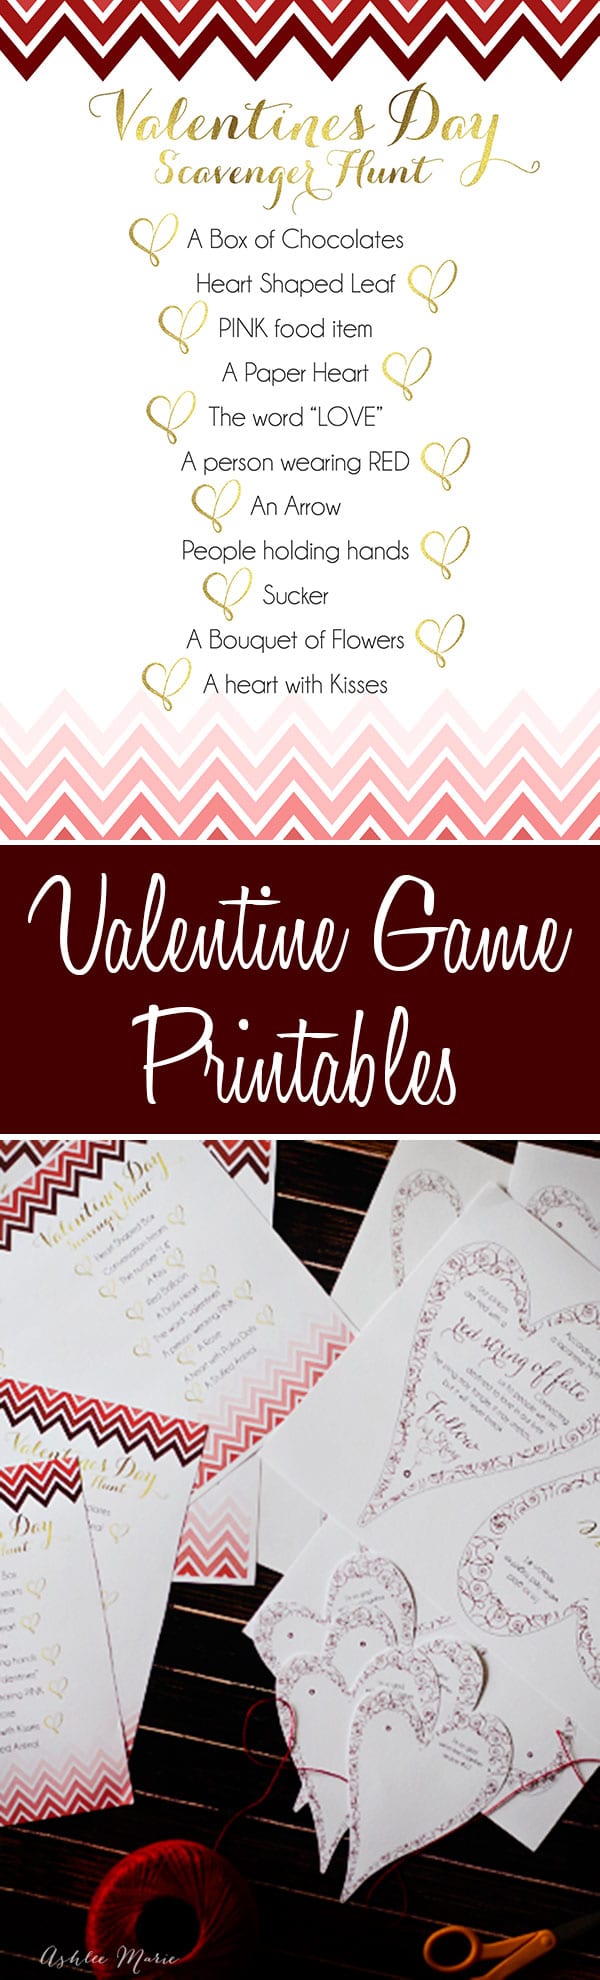 free printables for two versions of a valentines scavenger hunts